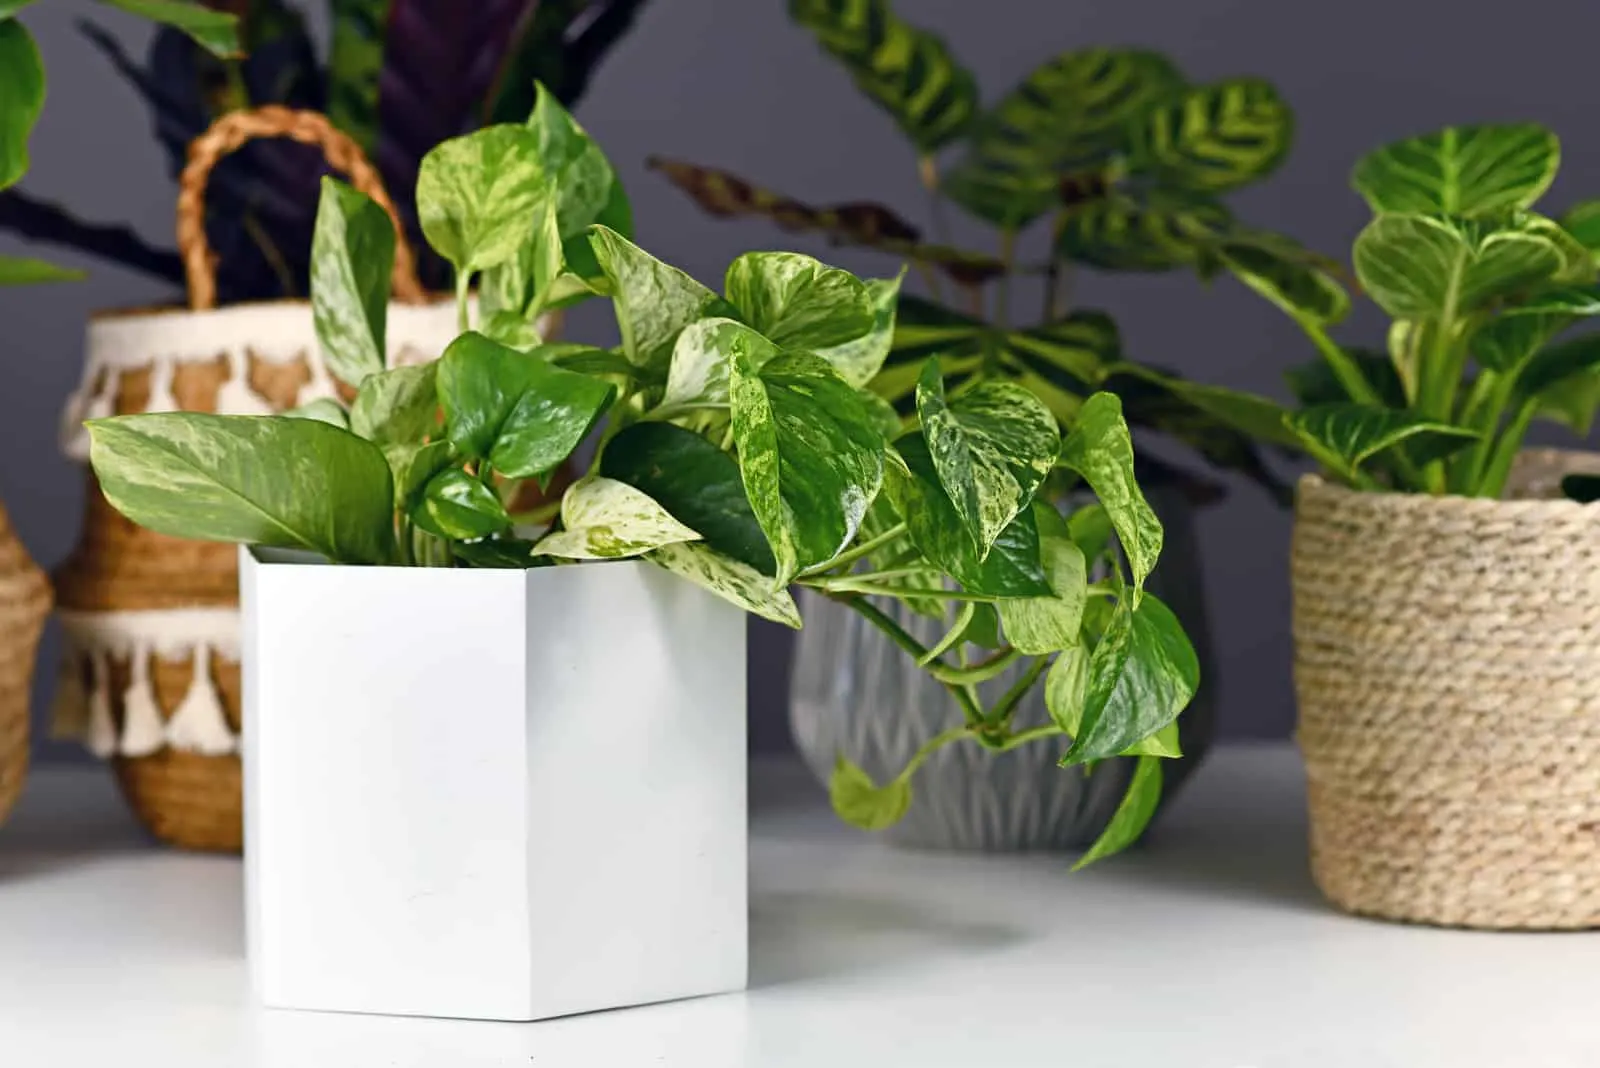 Marble Queen' pothos houseplant with white variegation in flower pot